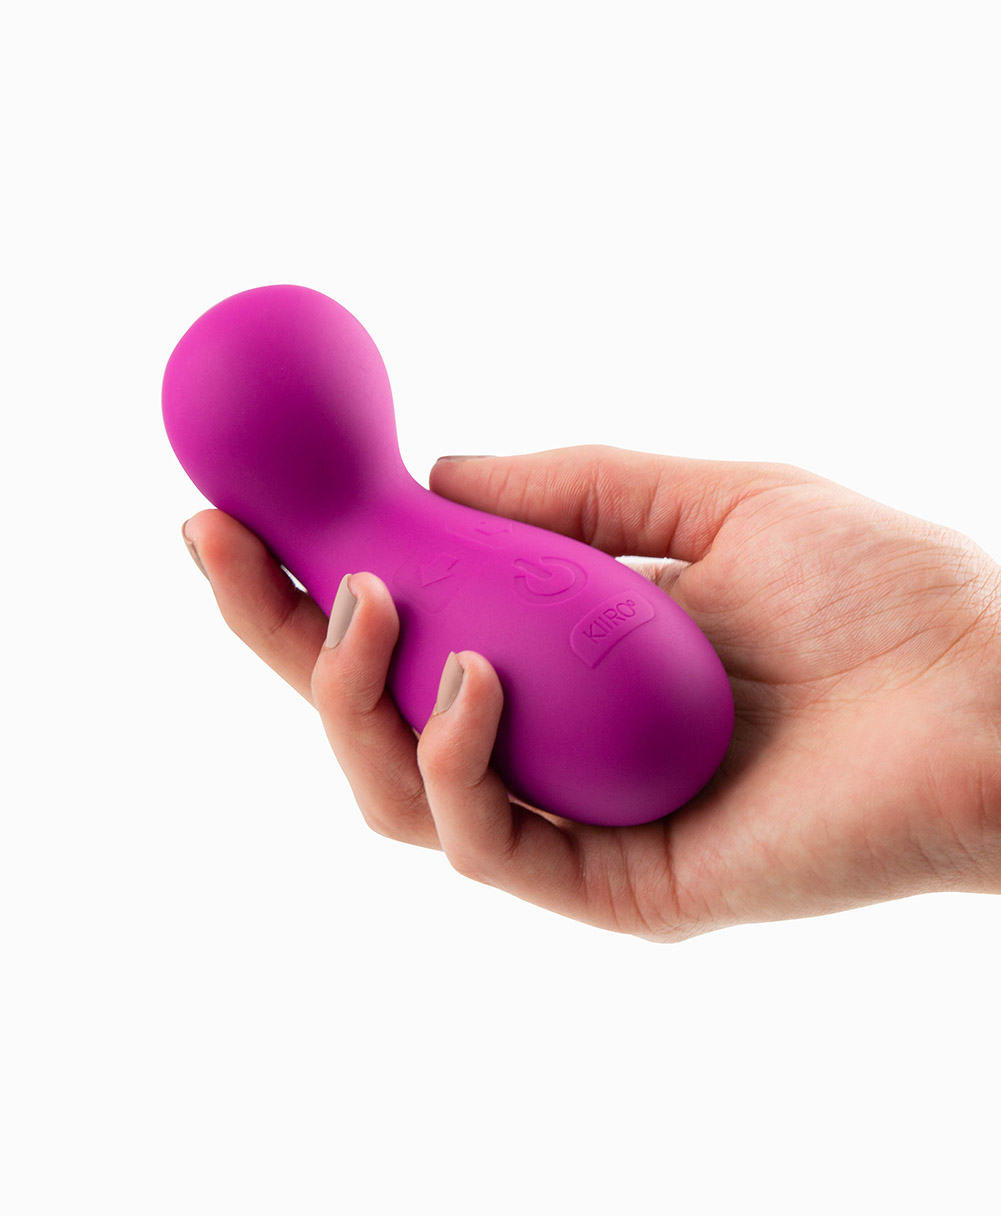 A woman's hand holding the Cliona launch, a pink vibrating toy by Kiiroo.